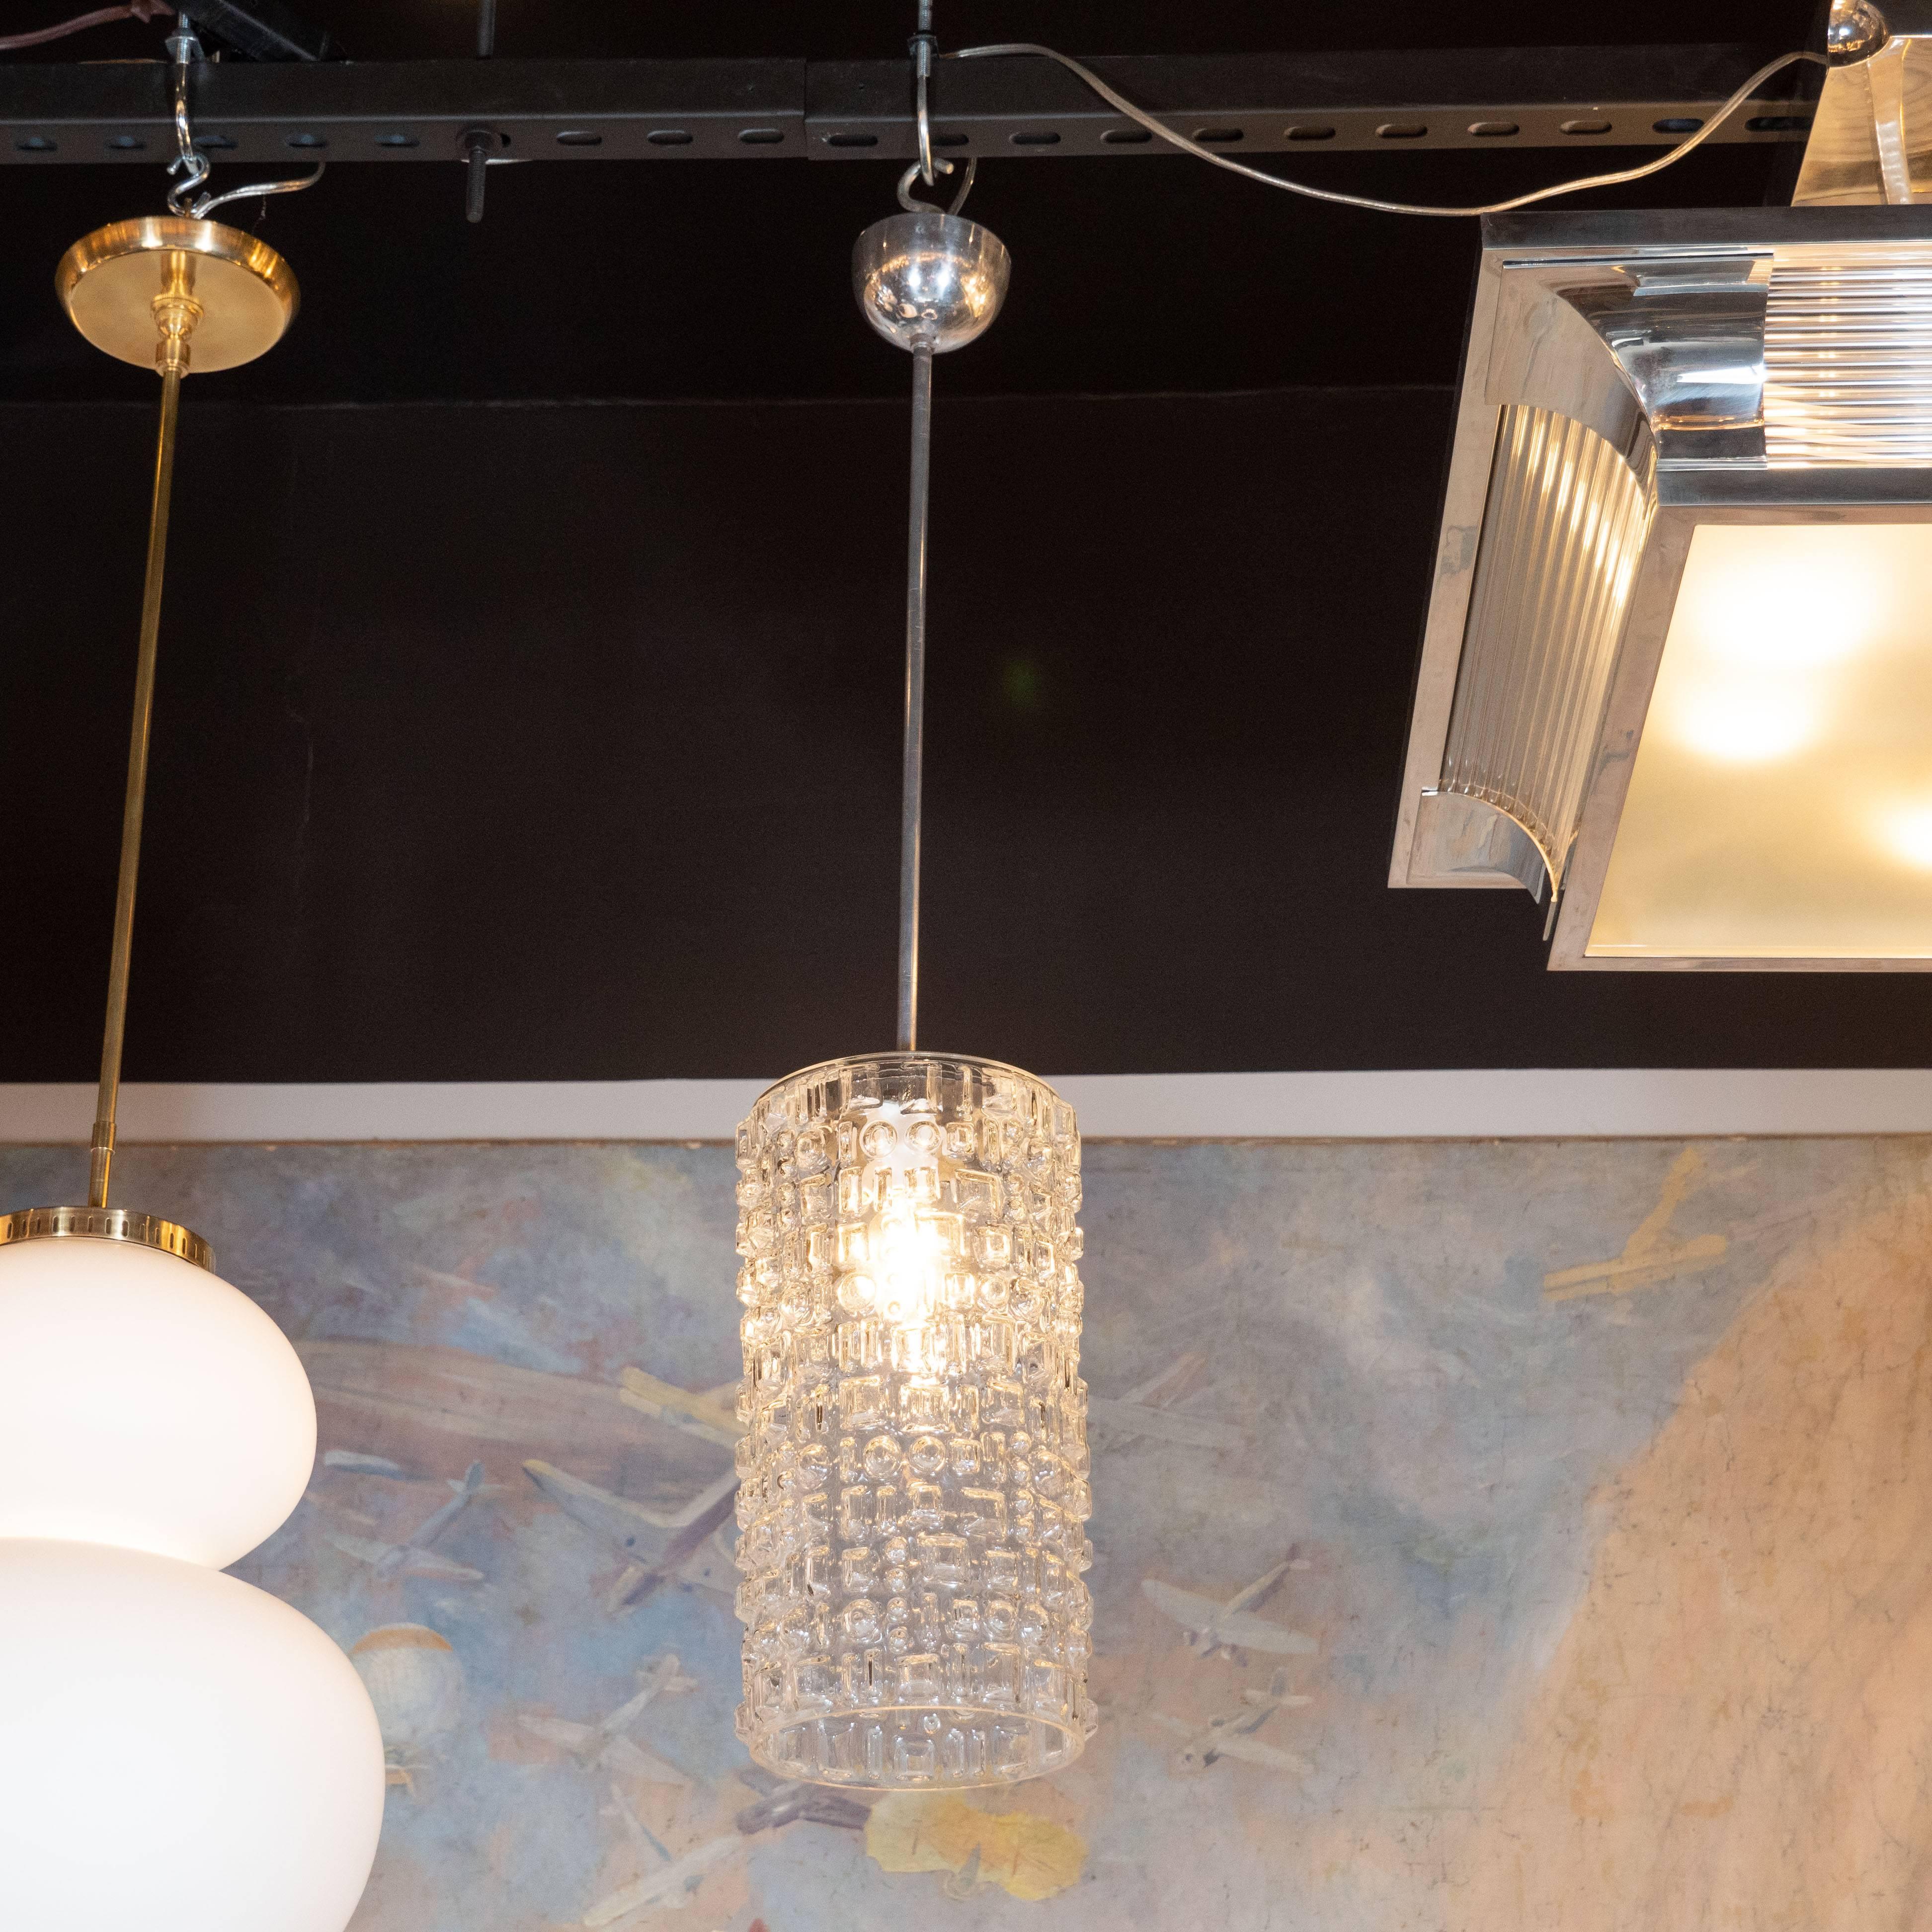 This refined and understated pendant was realized in Sweden, circa 1960. It offers a cylindrical body in molded highly textural glass with an abundance of protuberant geometric forms in relief on the surface. The fixture connects to the ceiling via